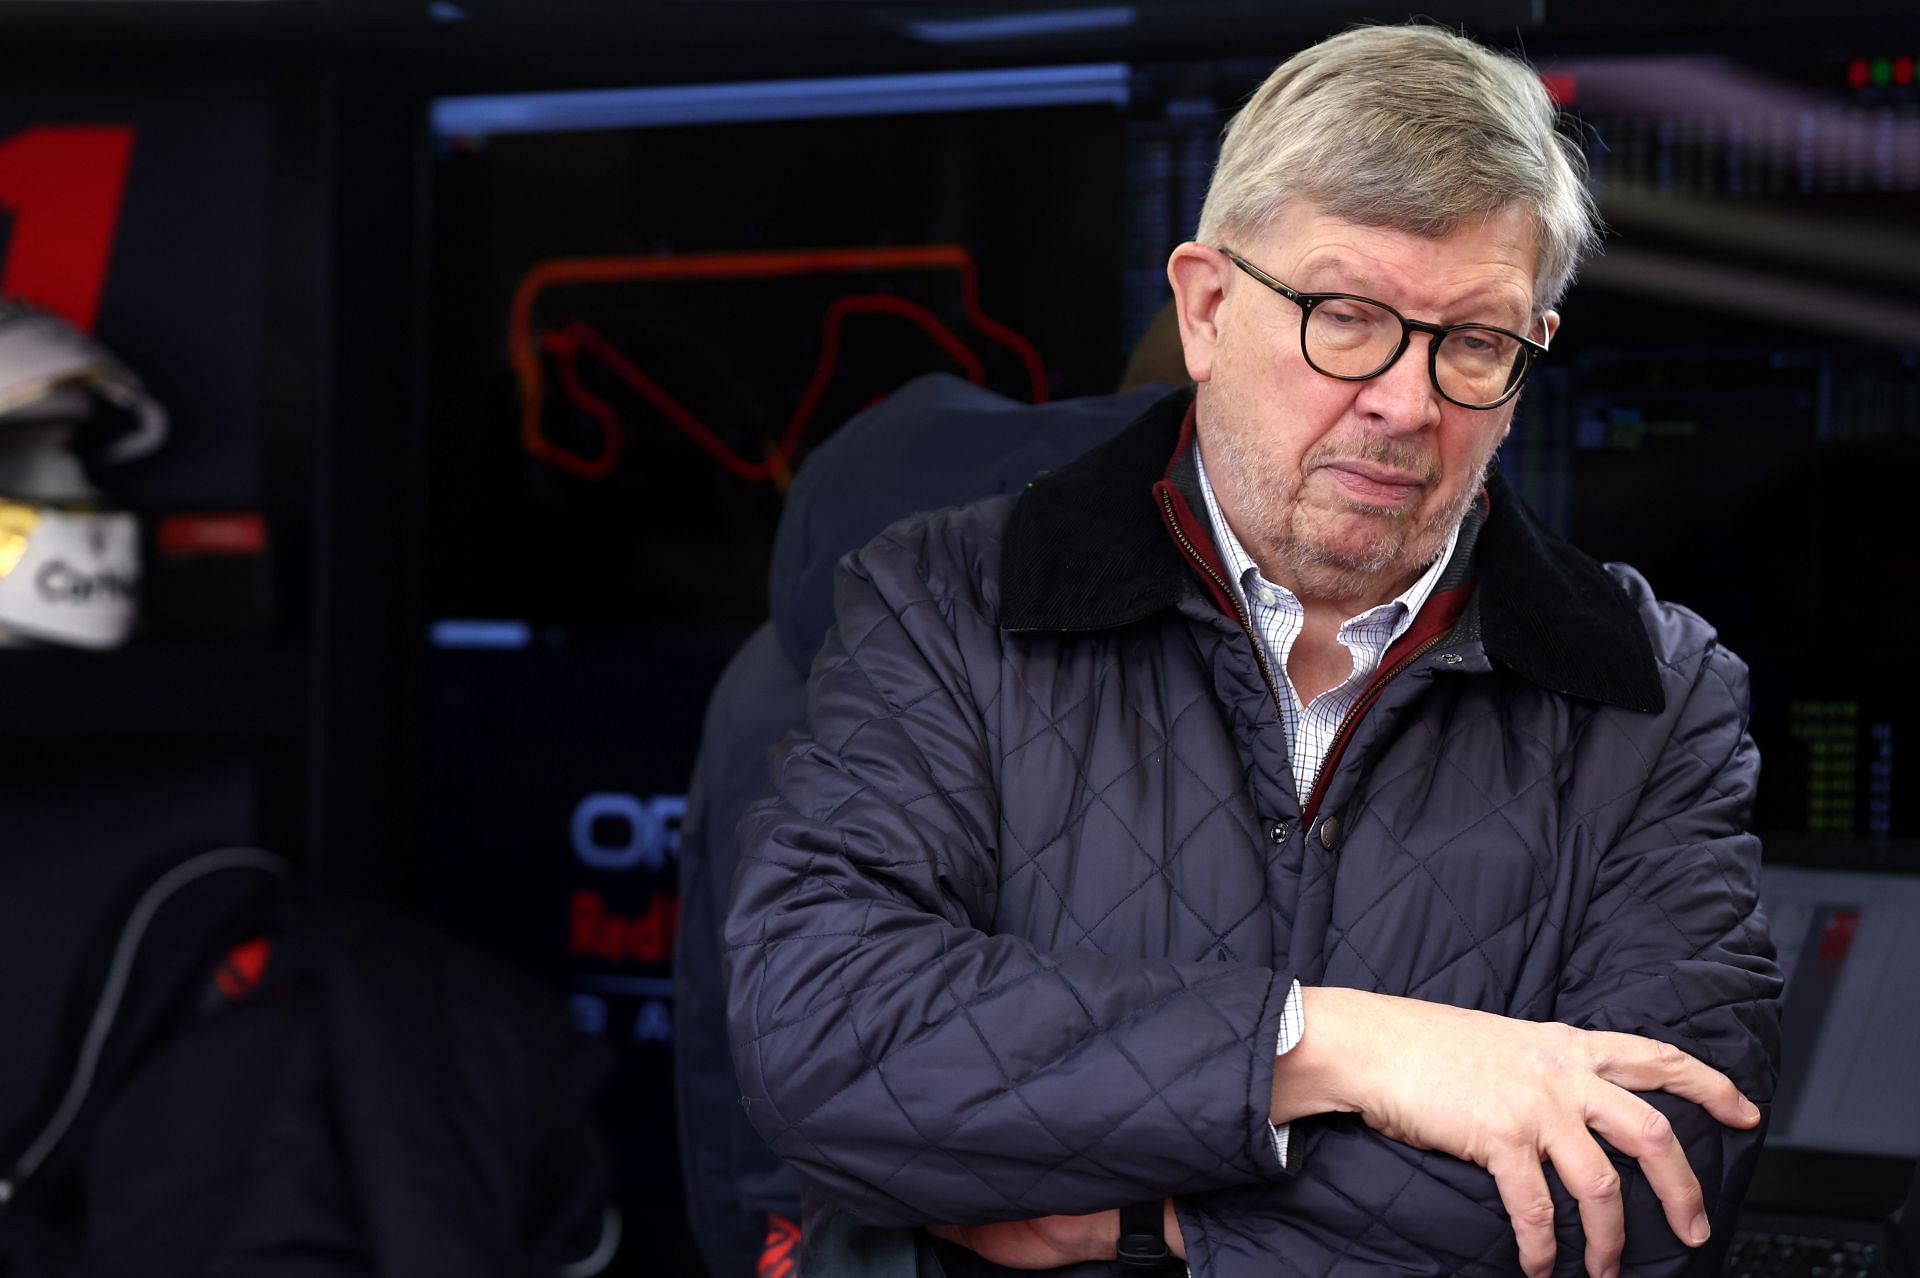 F1 managing director Ross Brawn during Day 3 of pre-season testing in Barcelona. (Photo by Mark Thompson/Getty Images)